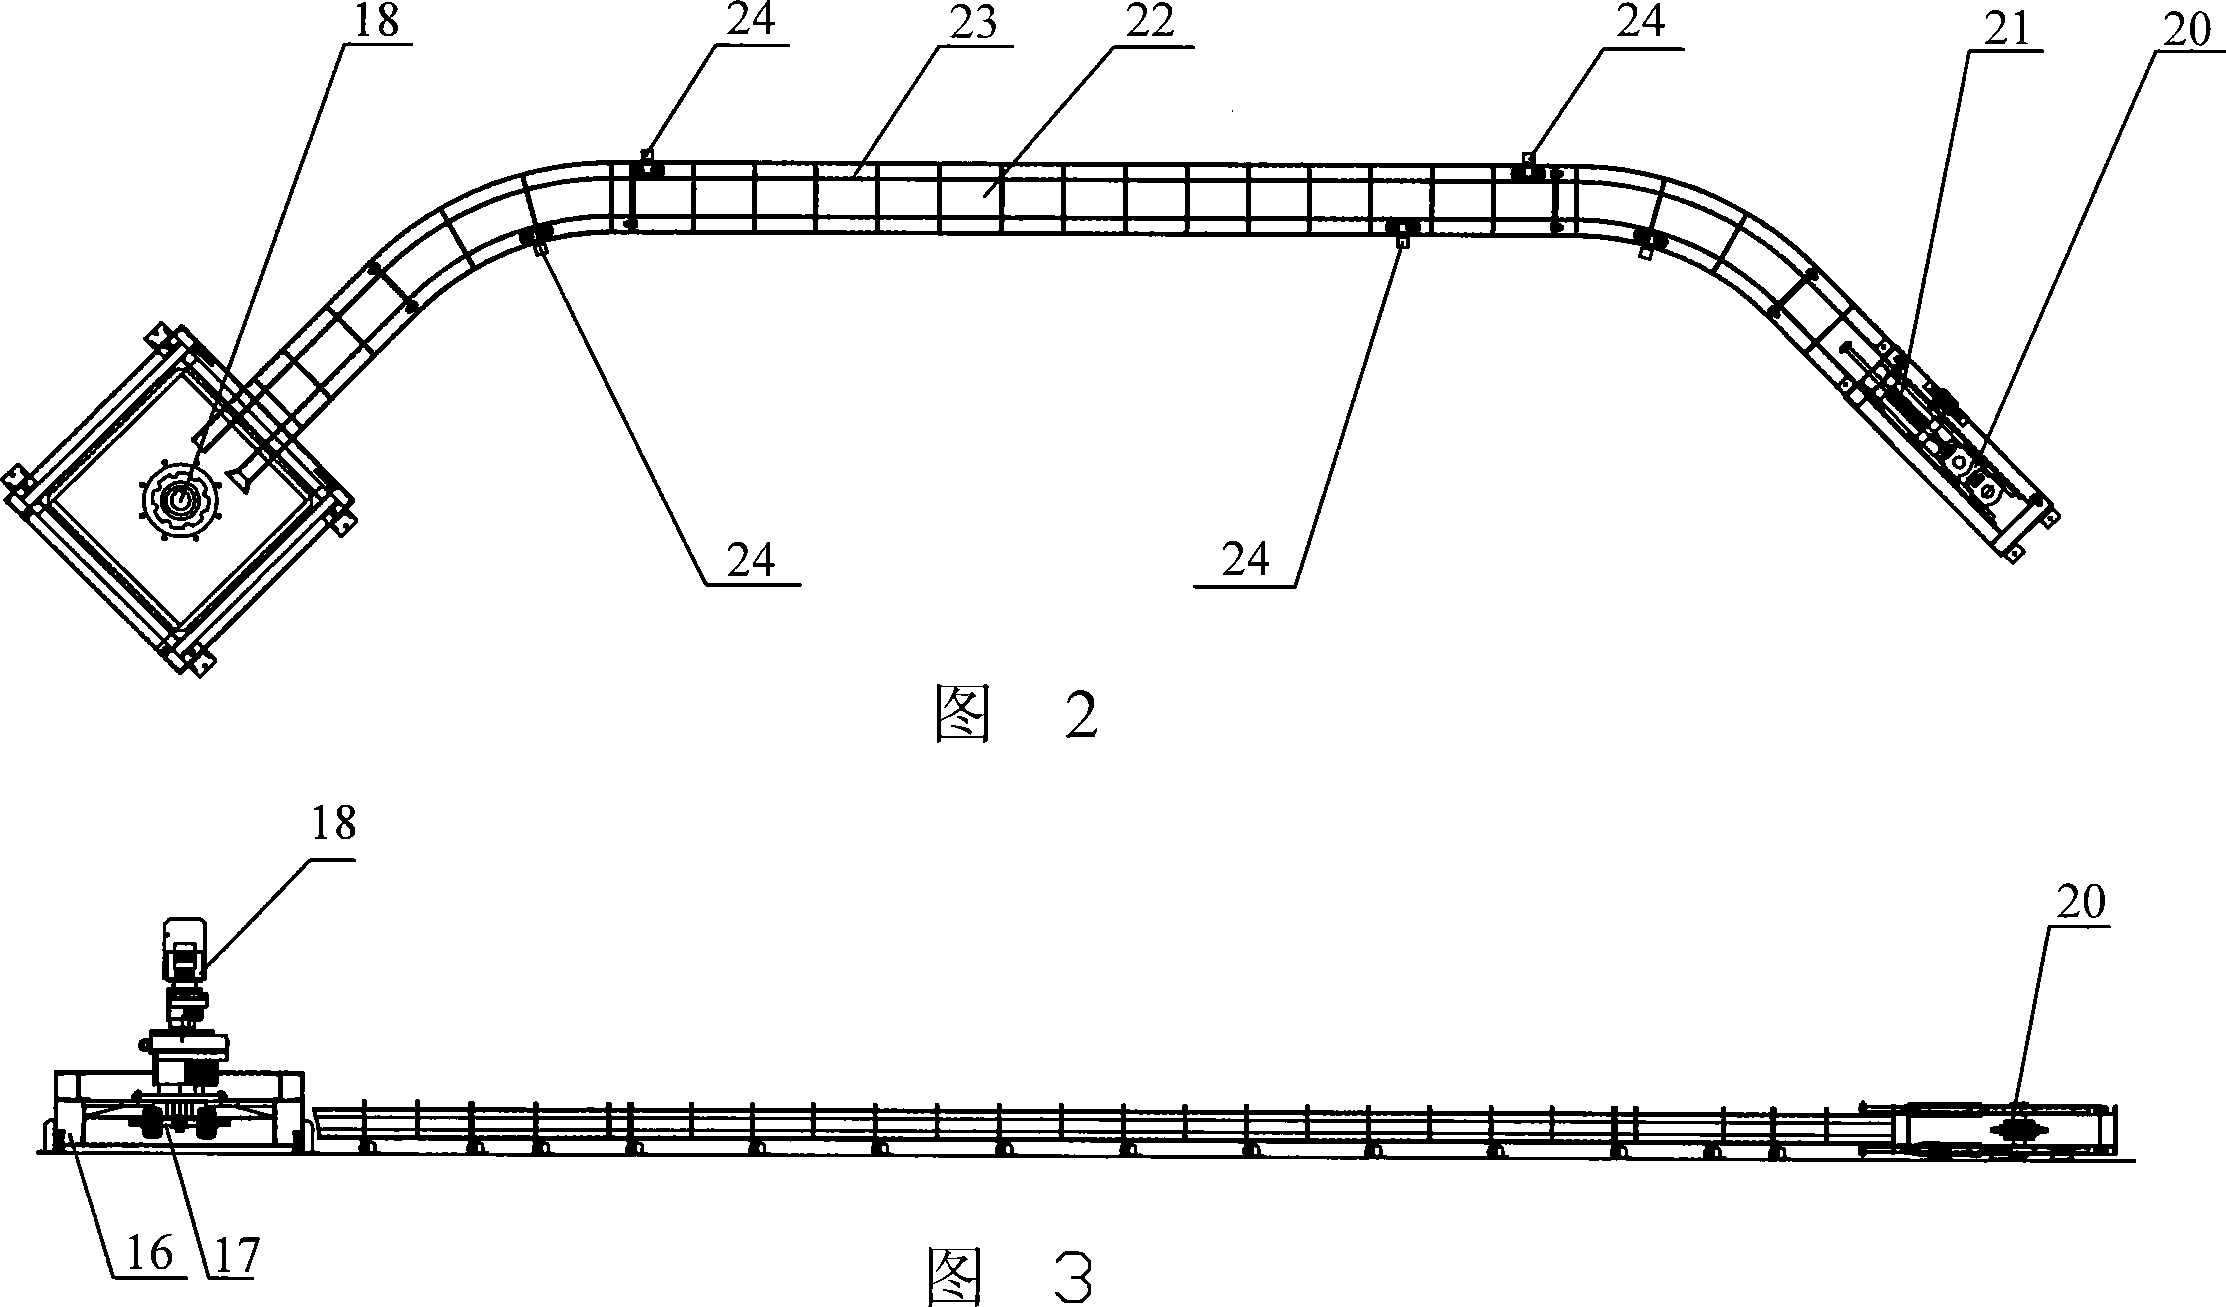 Unitization bogie chain side-pulling delivery system